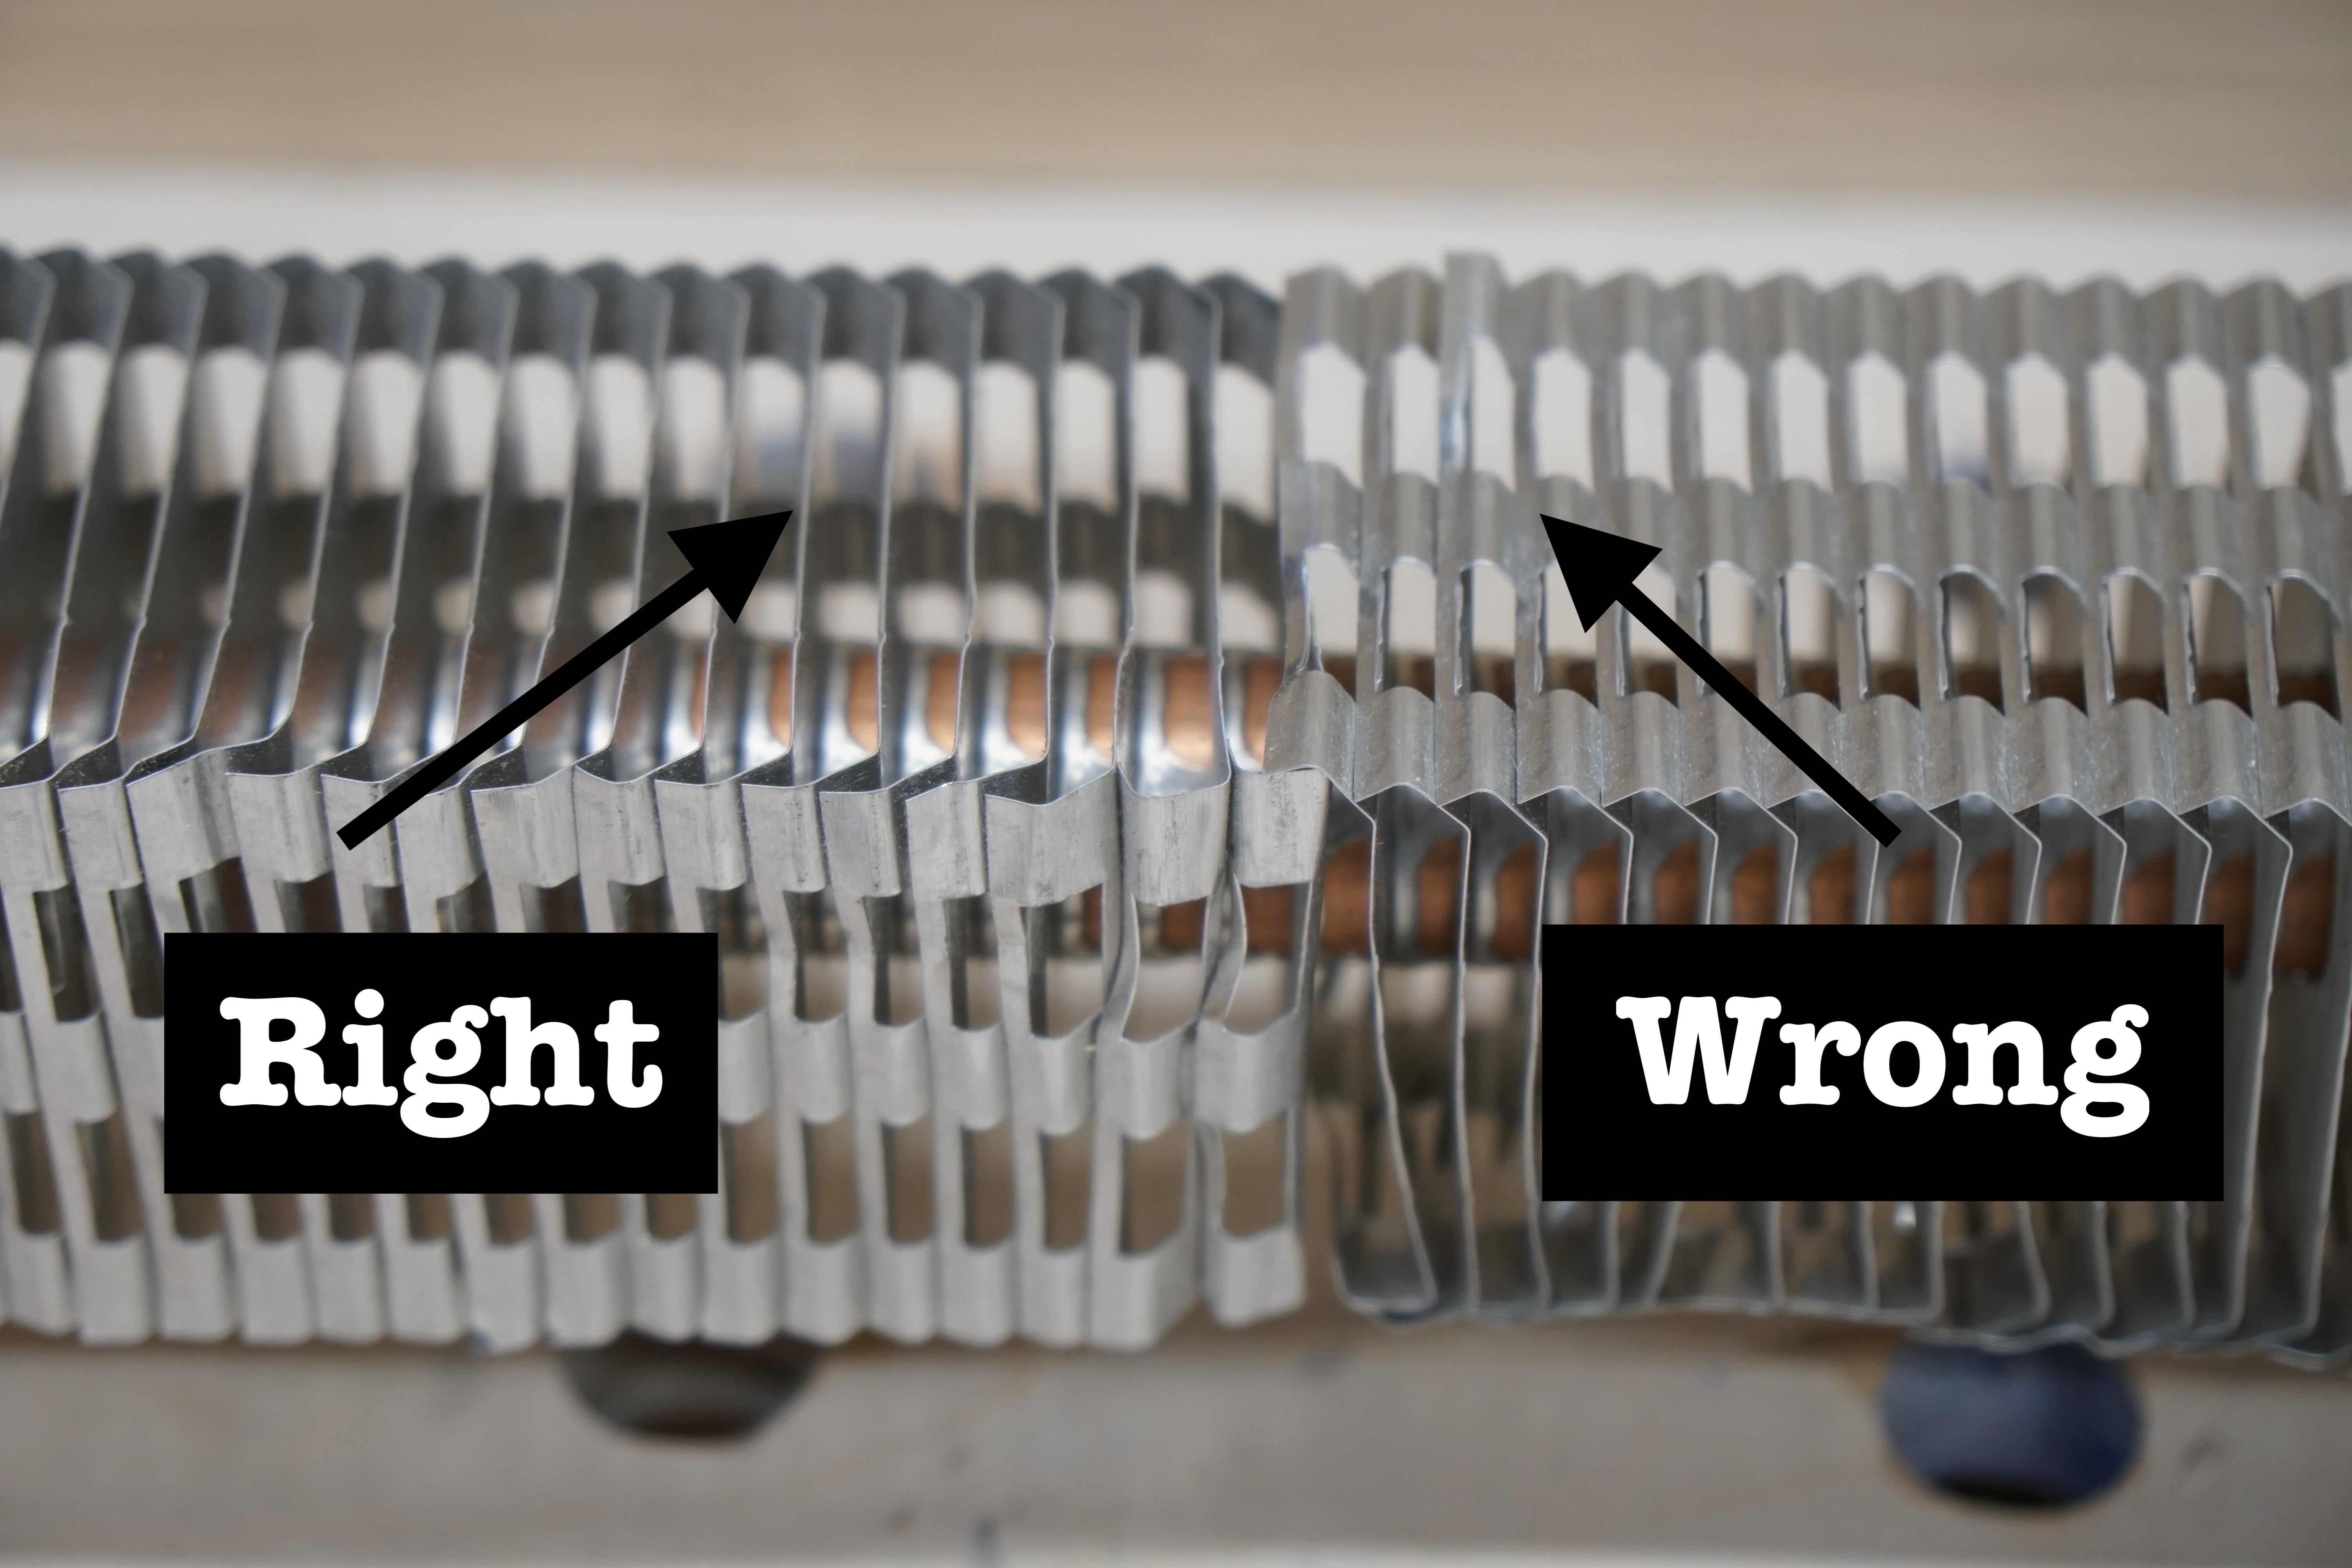 replacing fins on baseboard heater